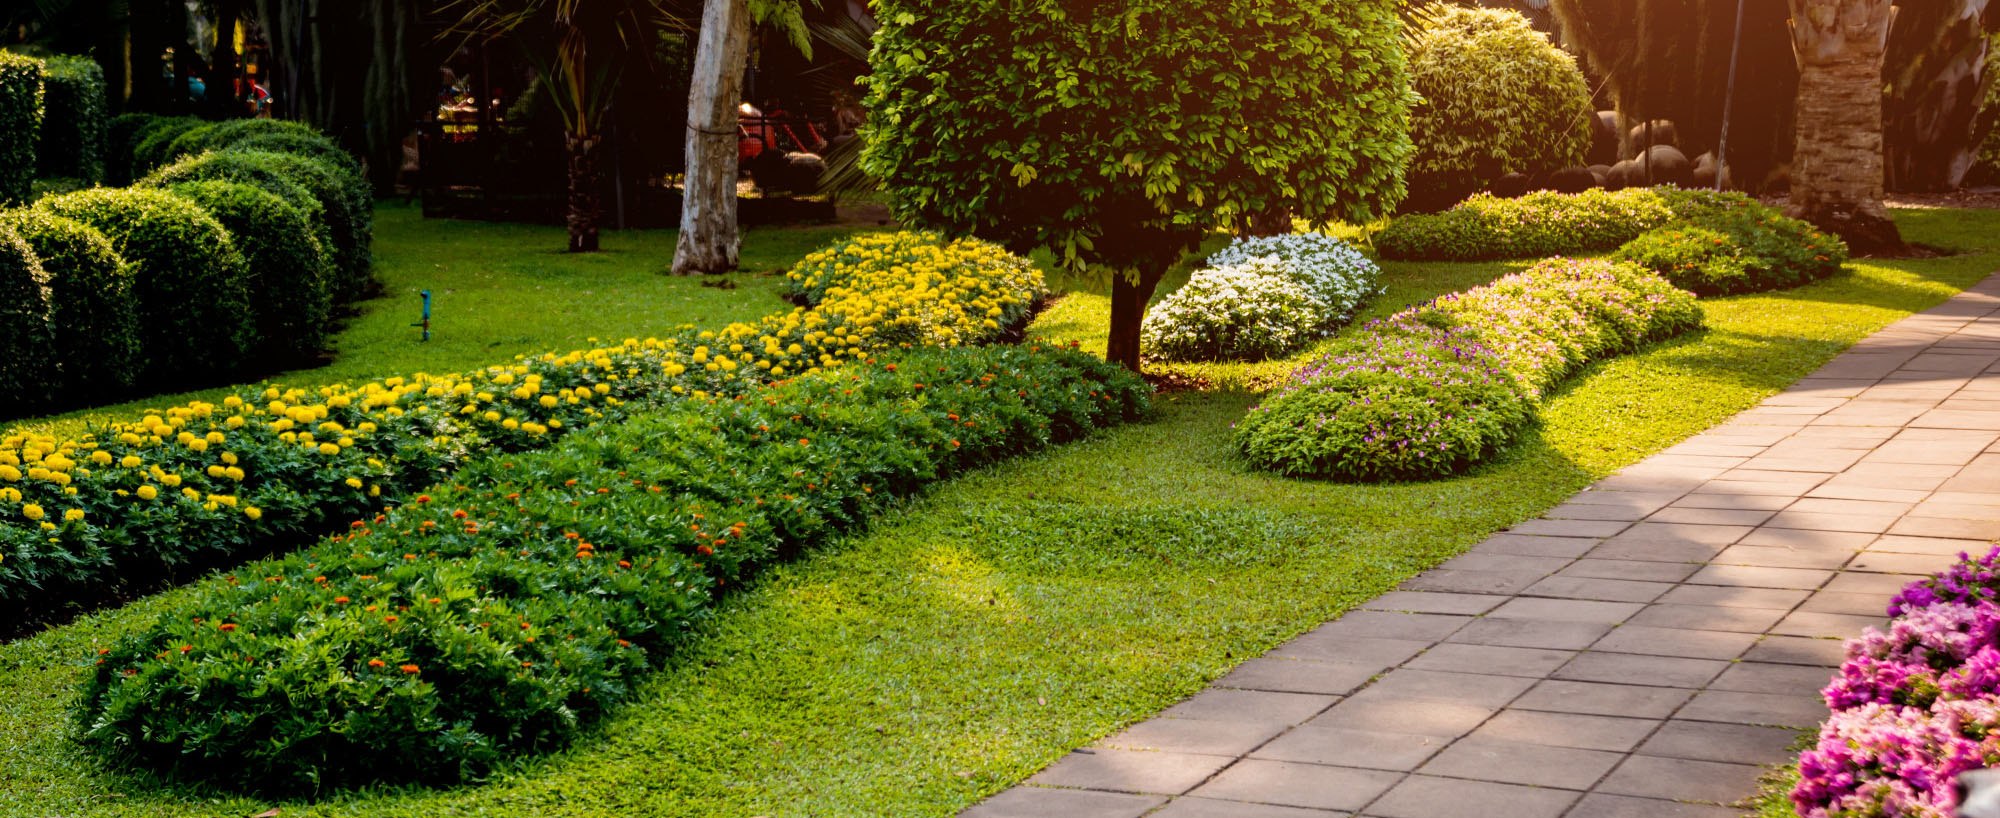 Creating a Low-Maintenance Landscape: Tips for Designing a Yard That Requires Minimal Upkeep.